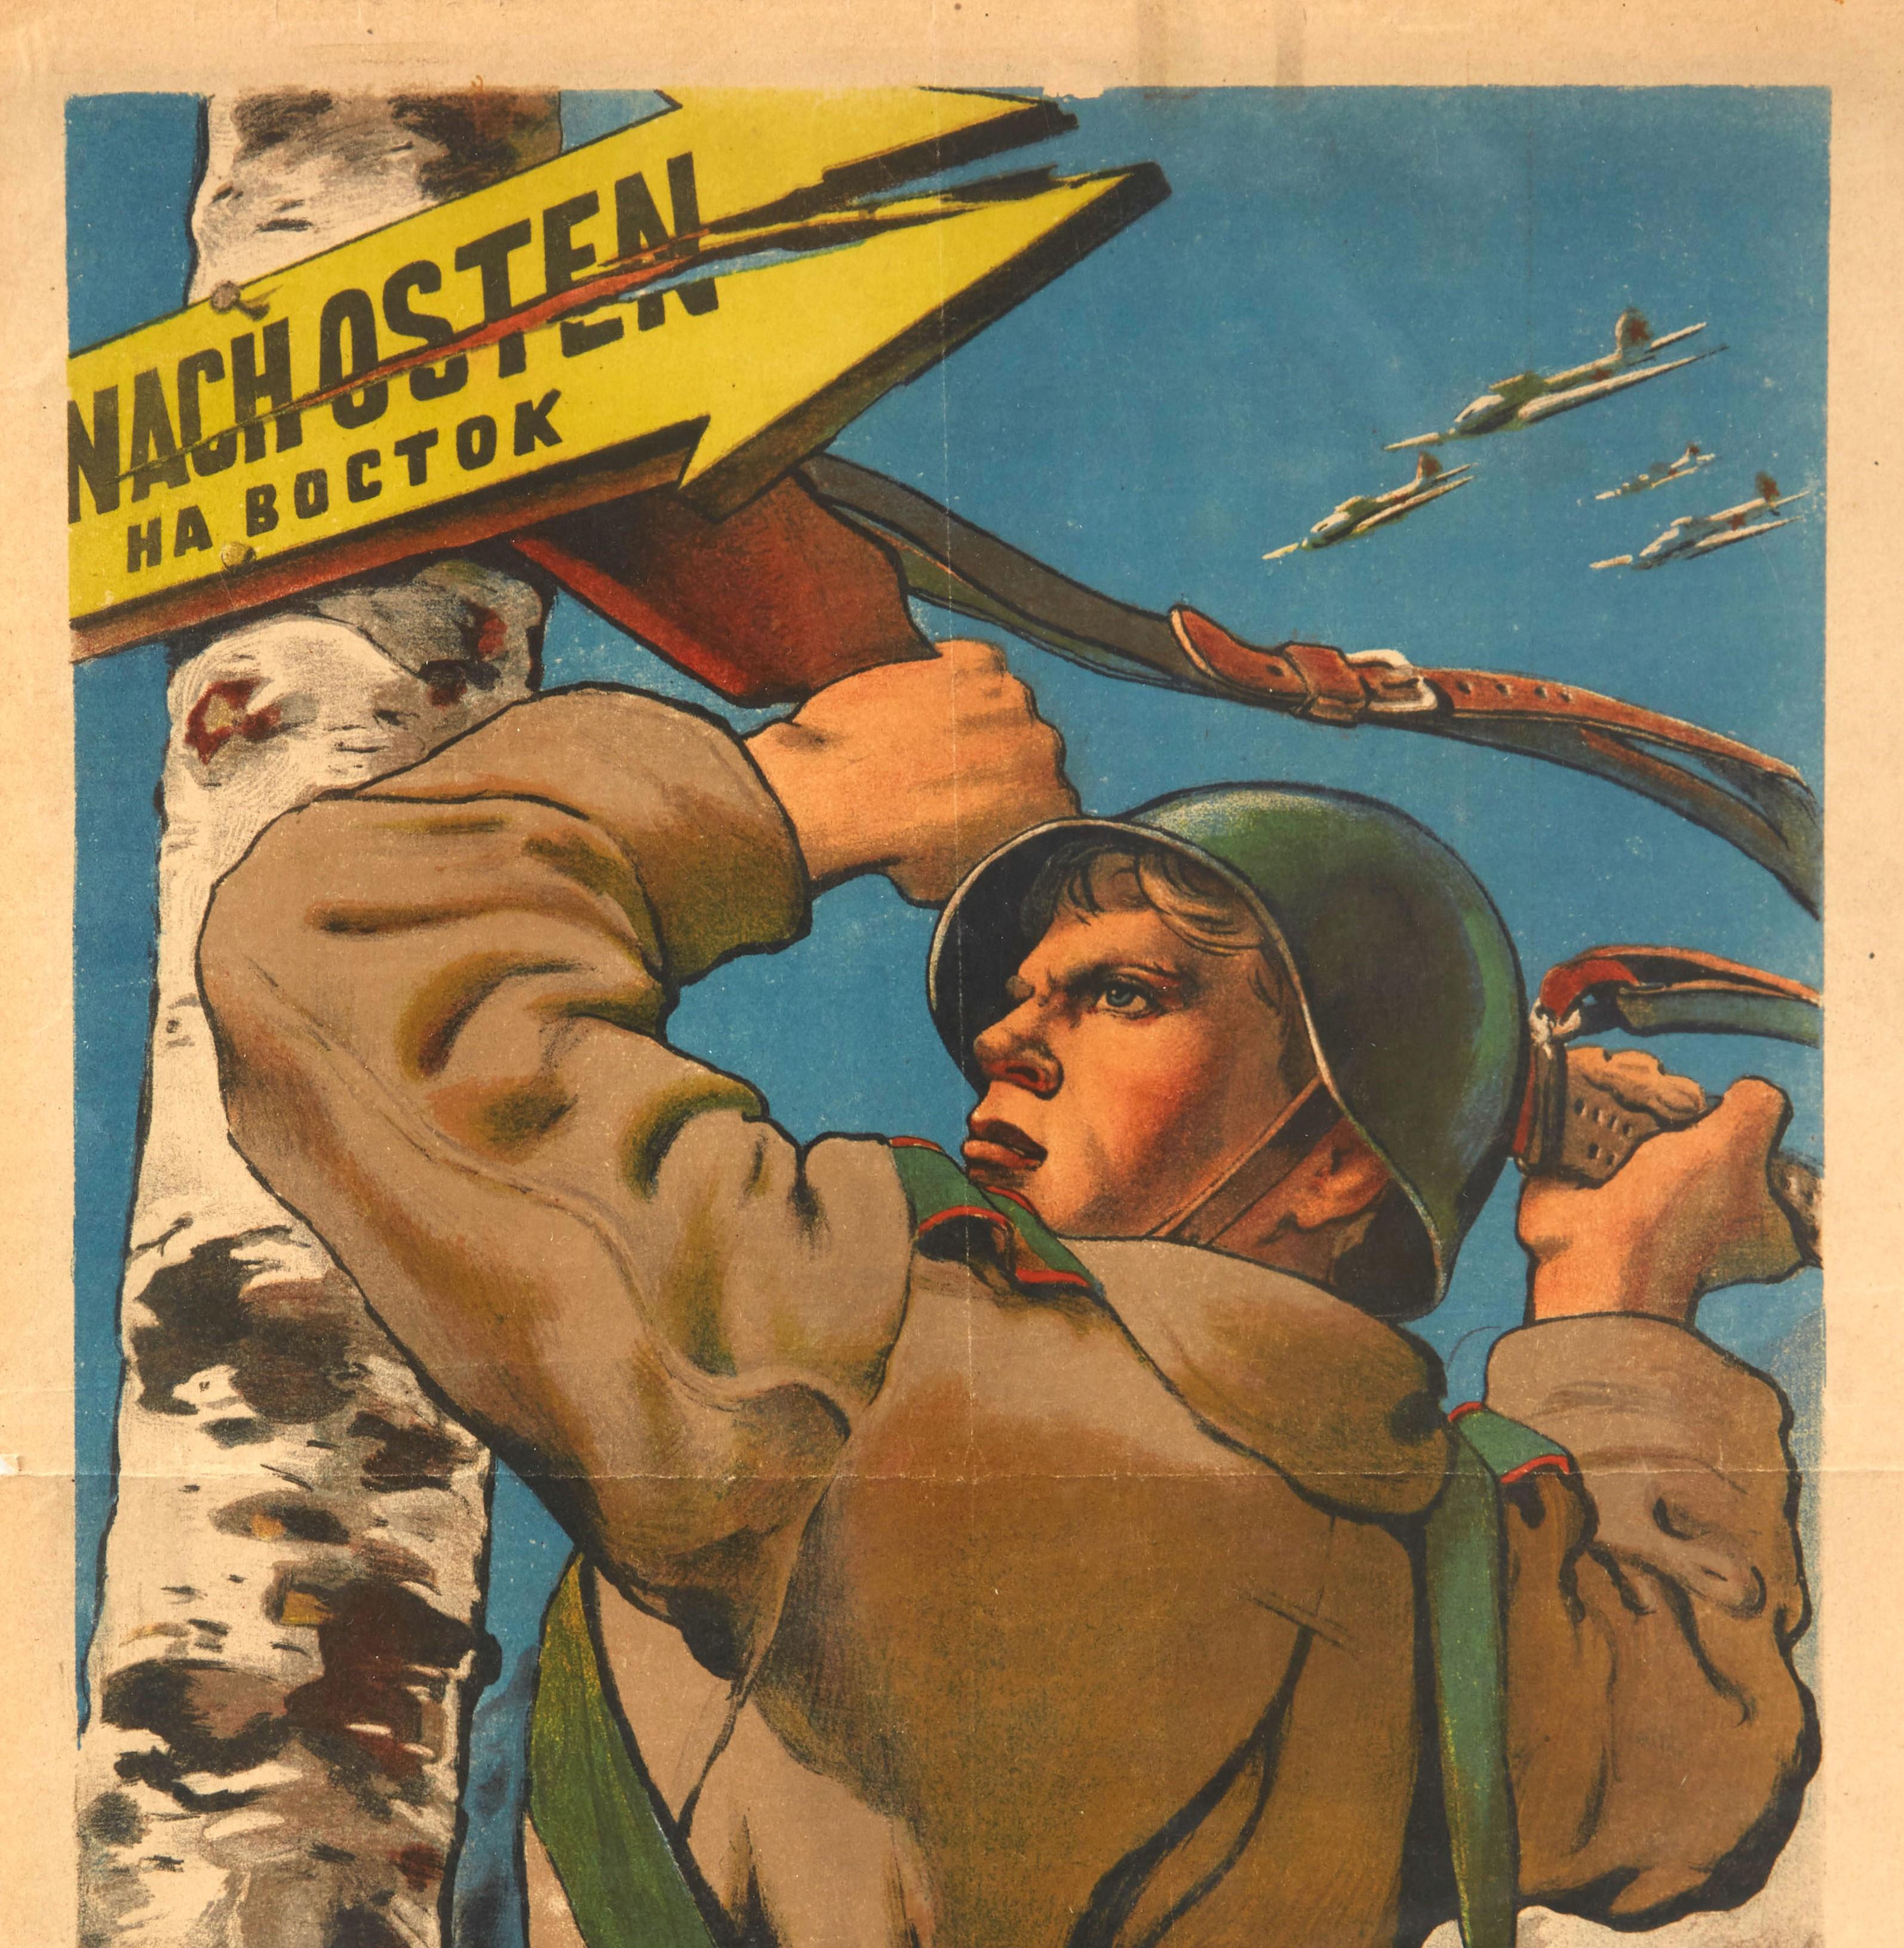 Original vintage World War Two Soviet propaganda poster depicting a soldier using his rifle gun to break down an arrow sign - Nach Osten ?? ?????? (Na Vostok / To The East) - nailed to a silver birch tree by the German forces pointing towards Russia